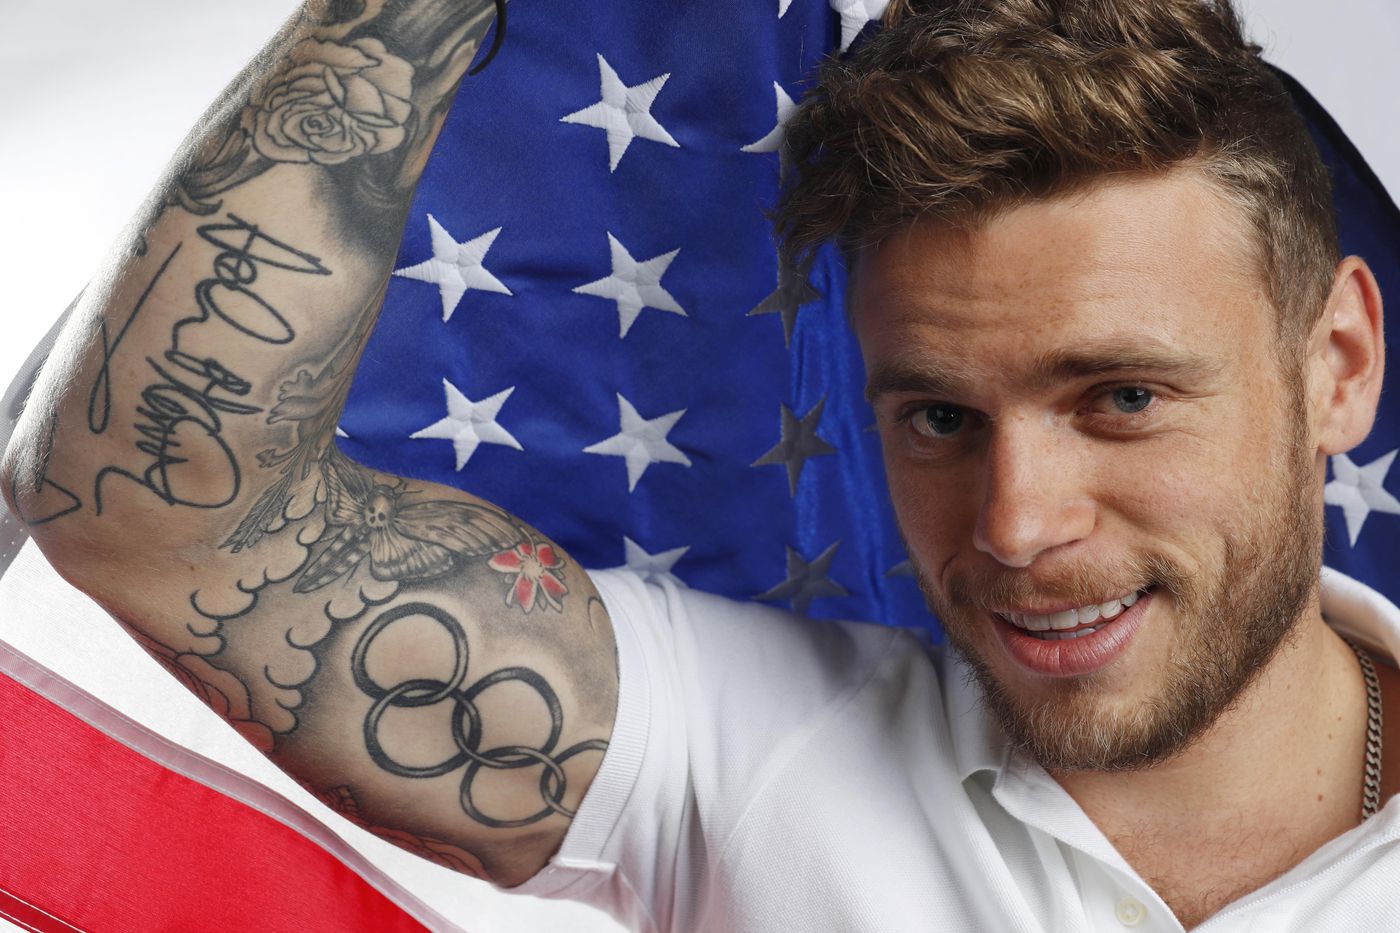 Gus Kenworthy teams up with All-Star Pete Alonso to Shred Hate on the inter...